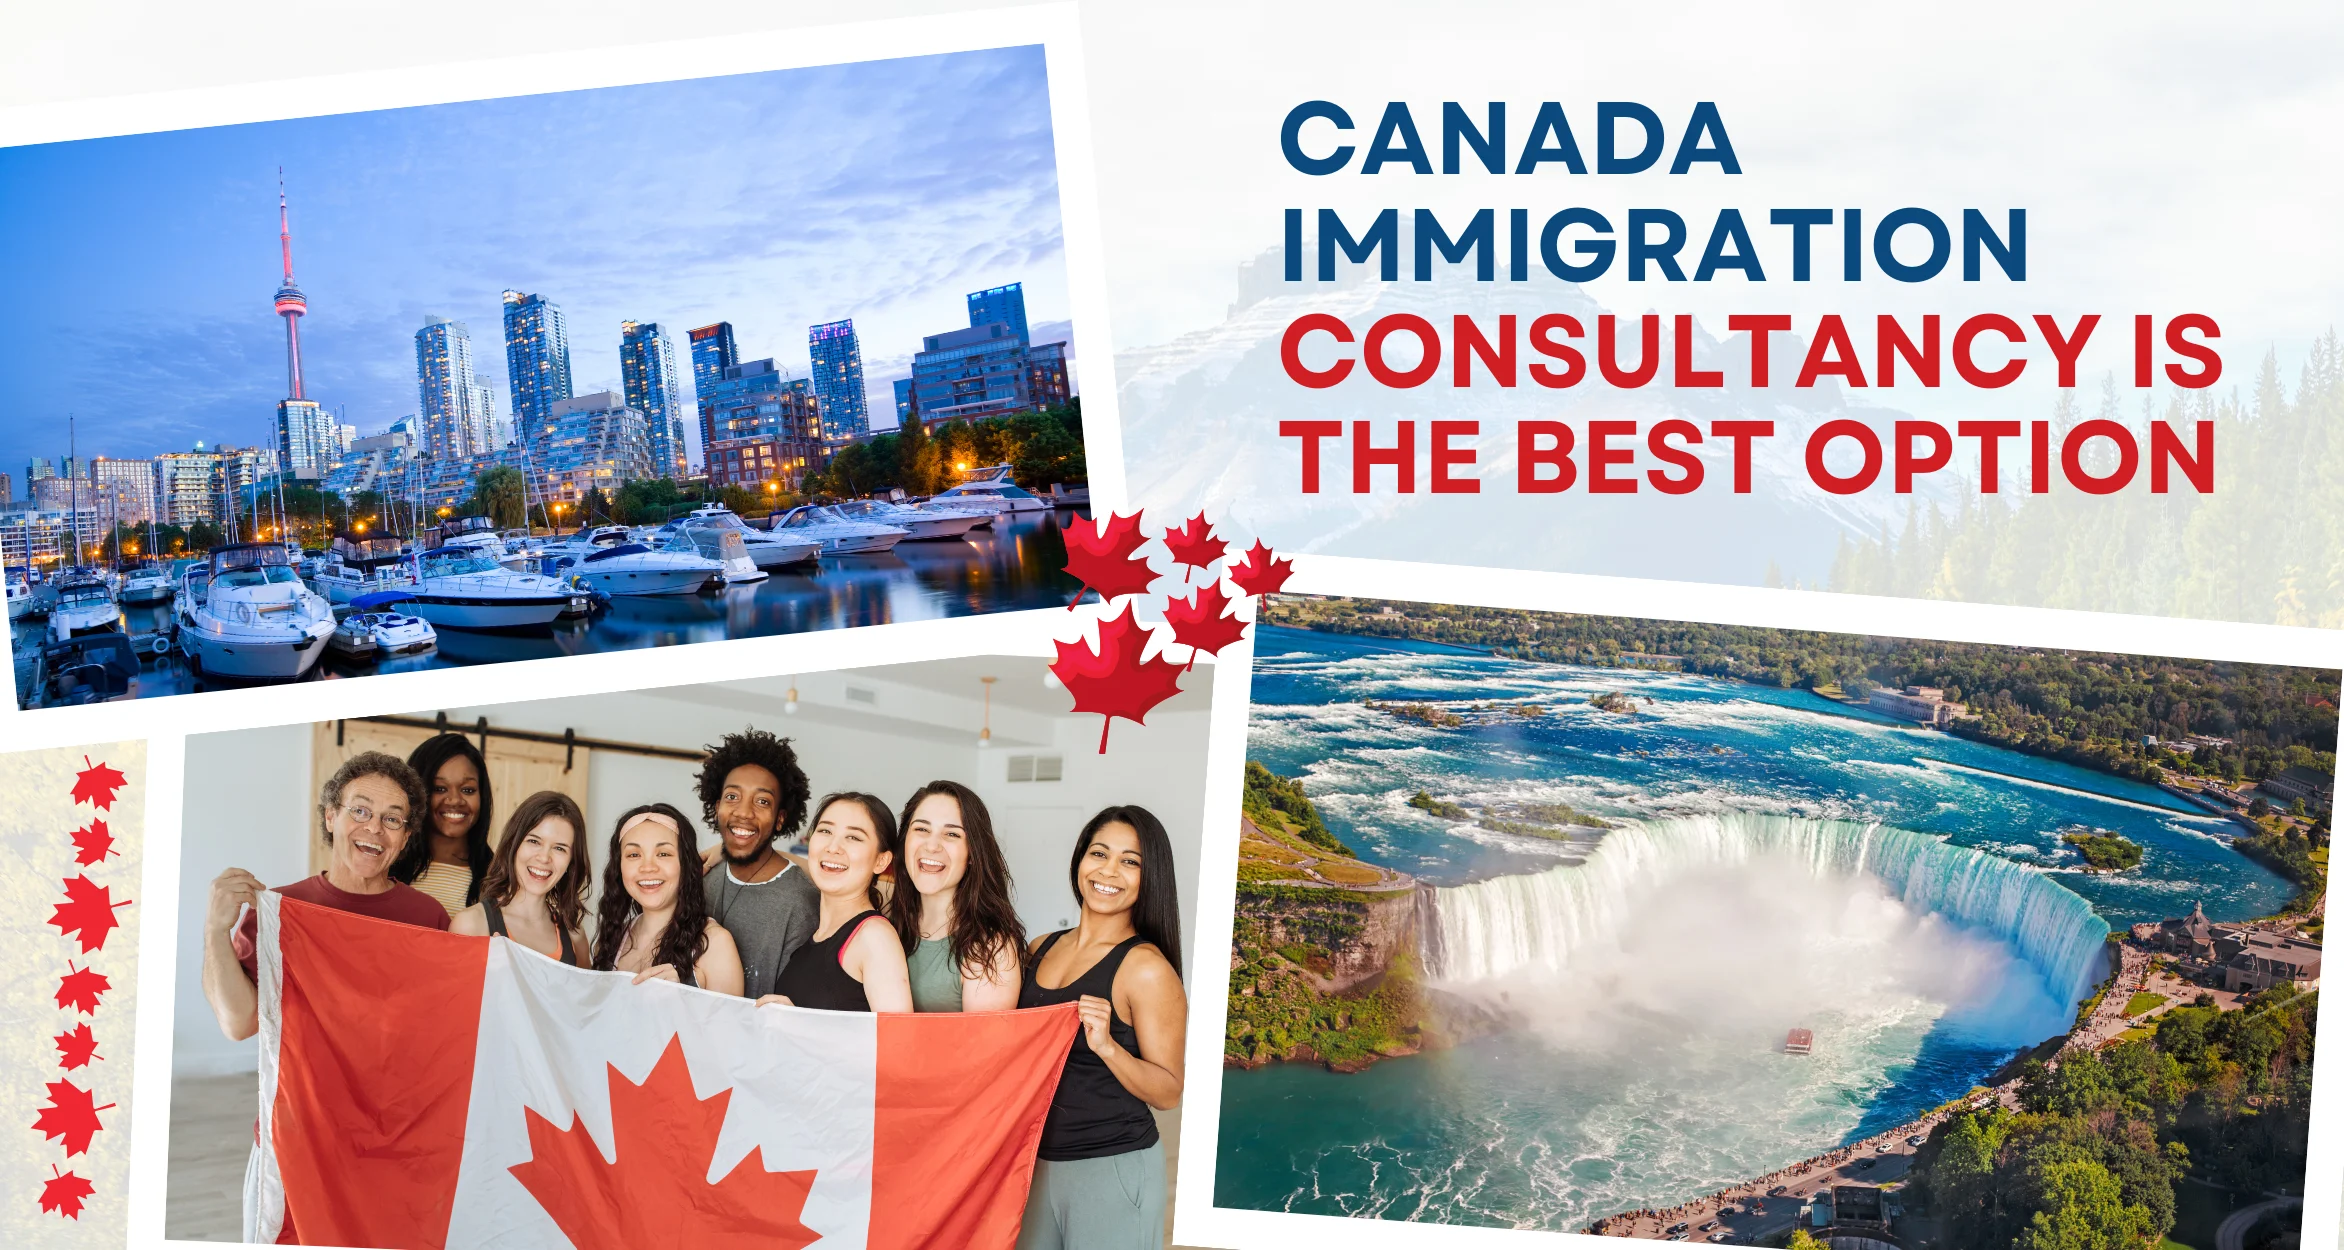 Canada immigration consultancy is the best option